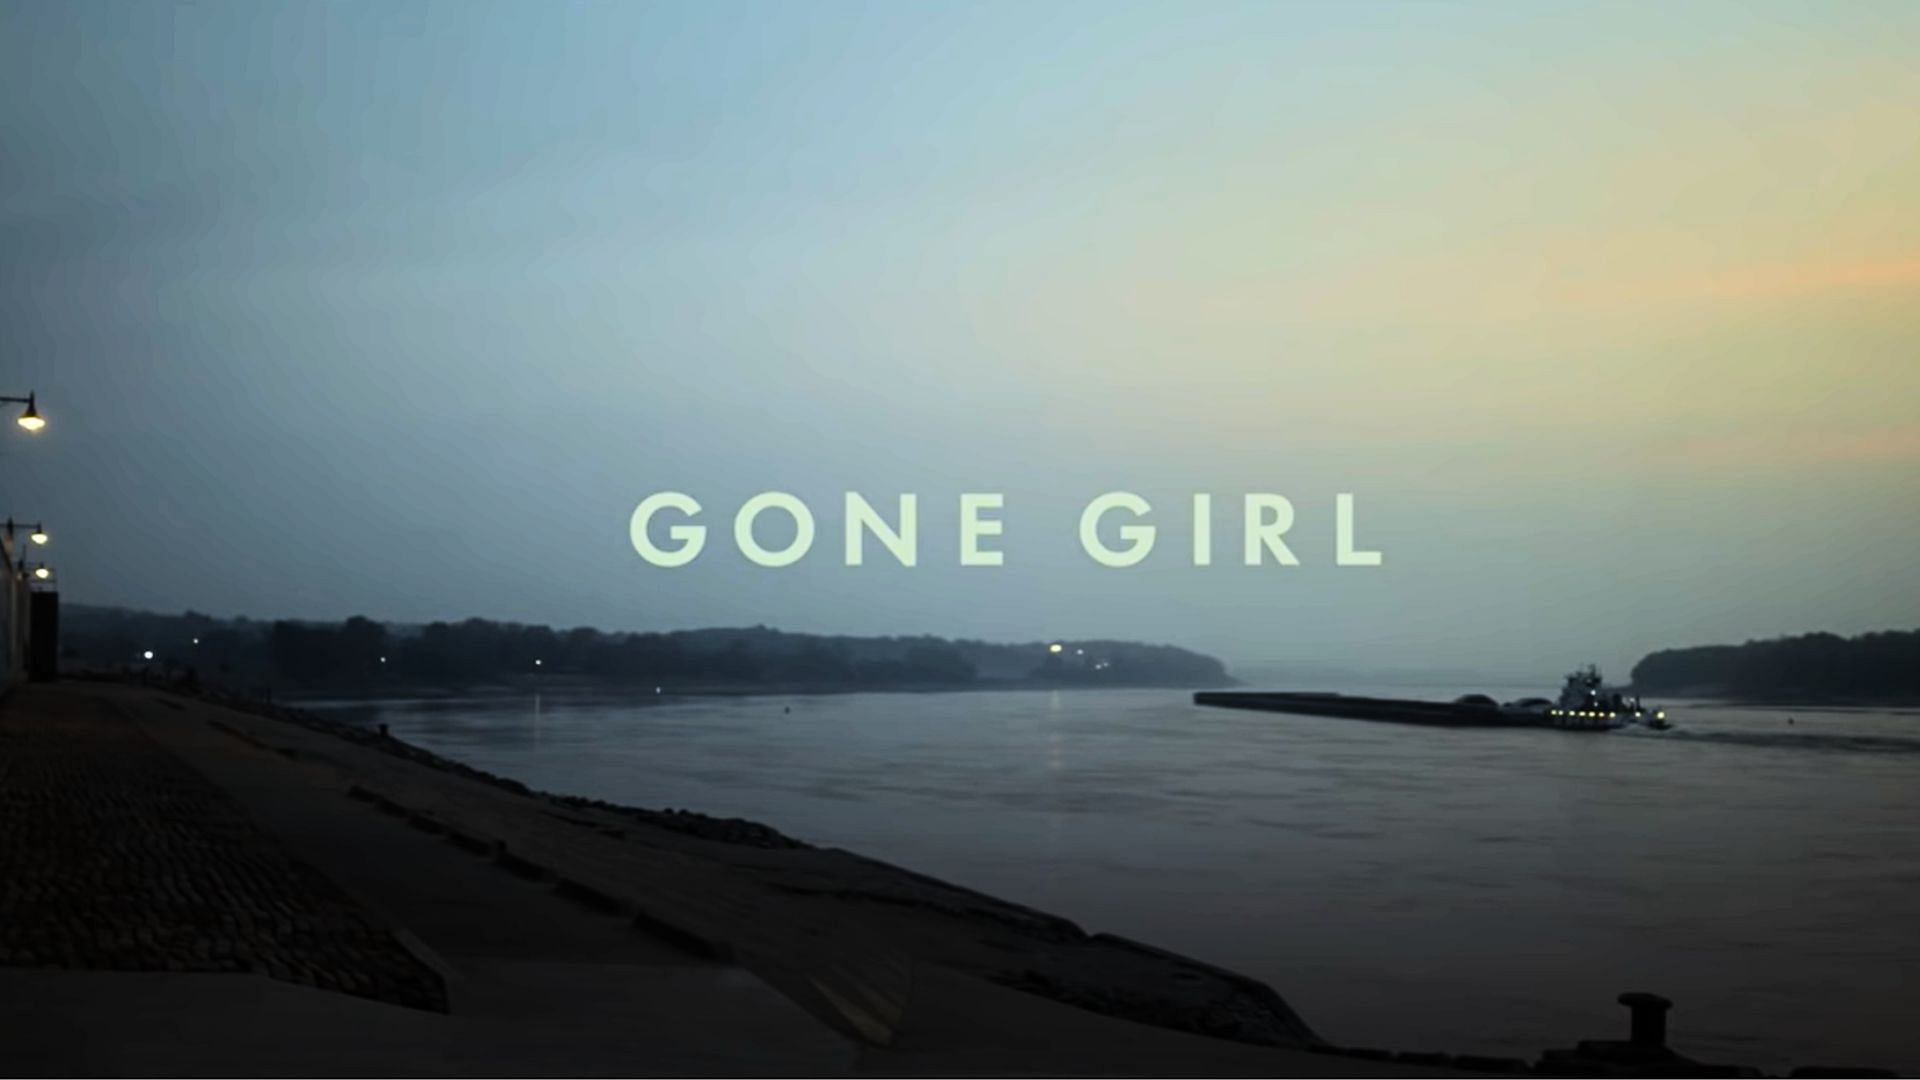 Gone Girl is inspired by real-life missing case (Image via 20th Century Fox)